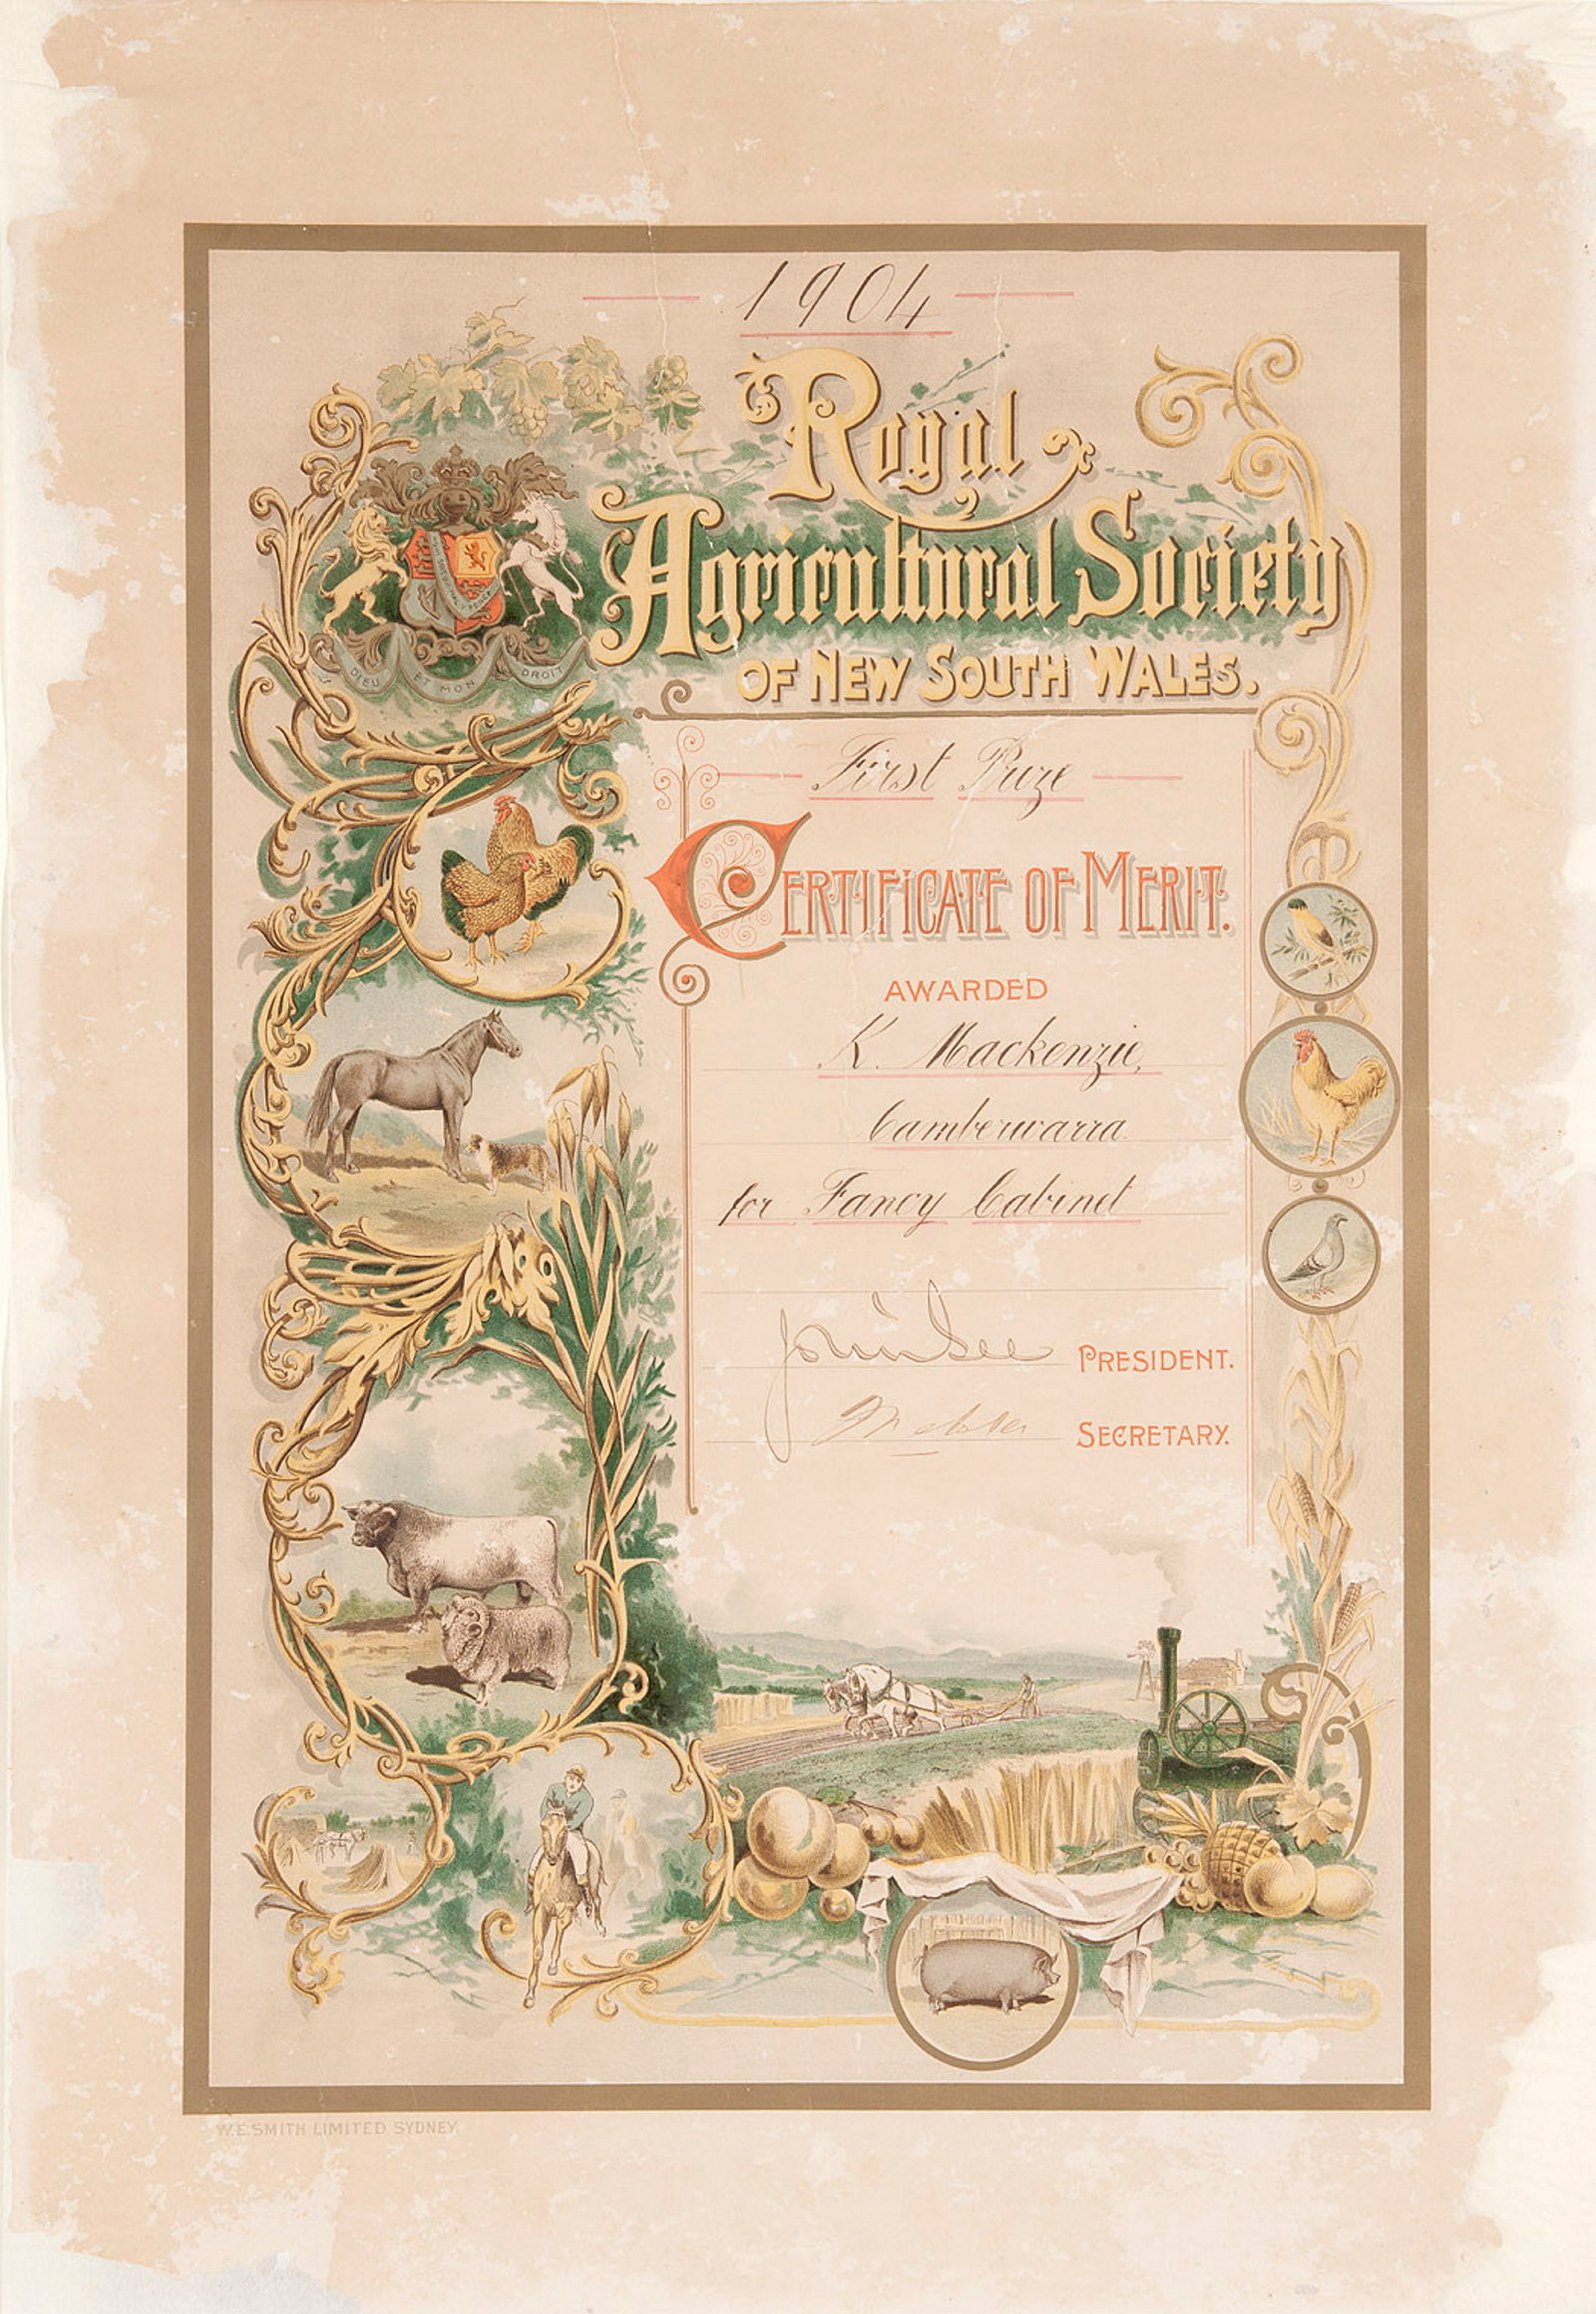 Ornately decorated certificate.